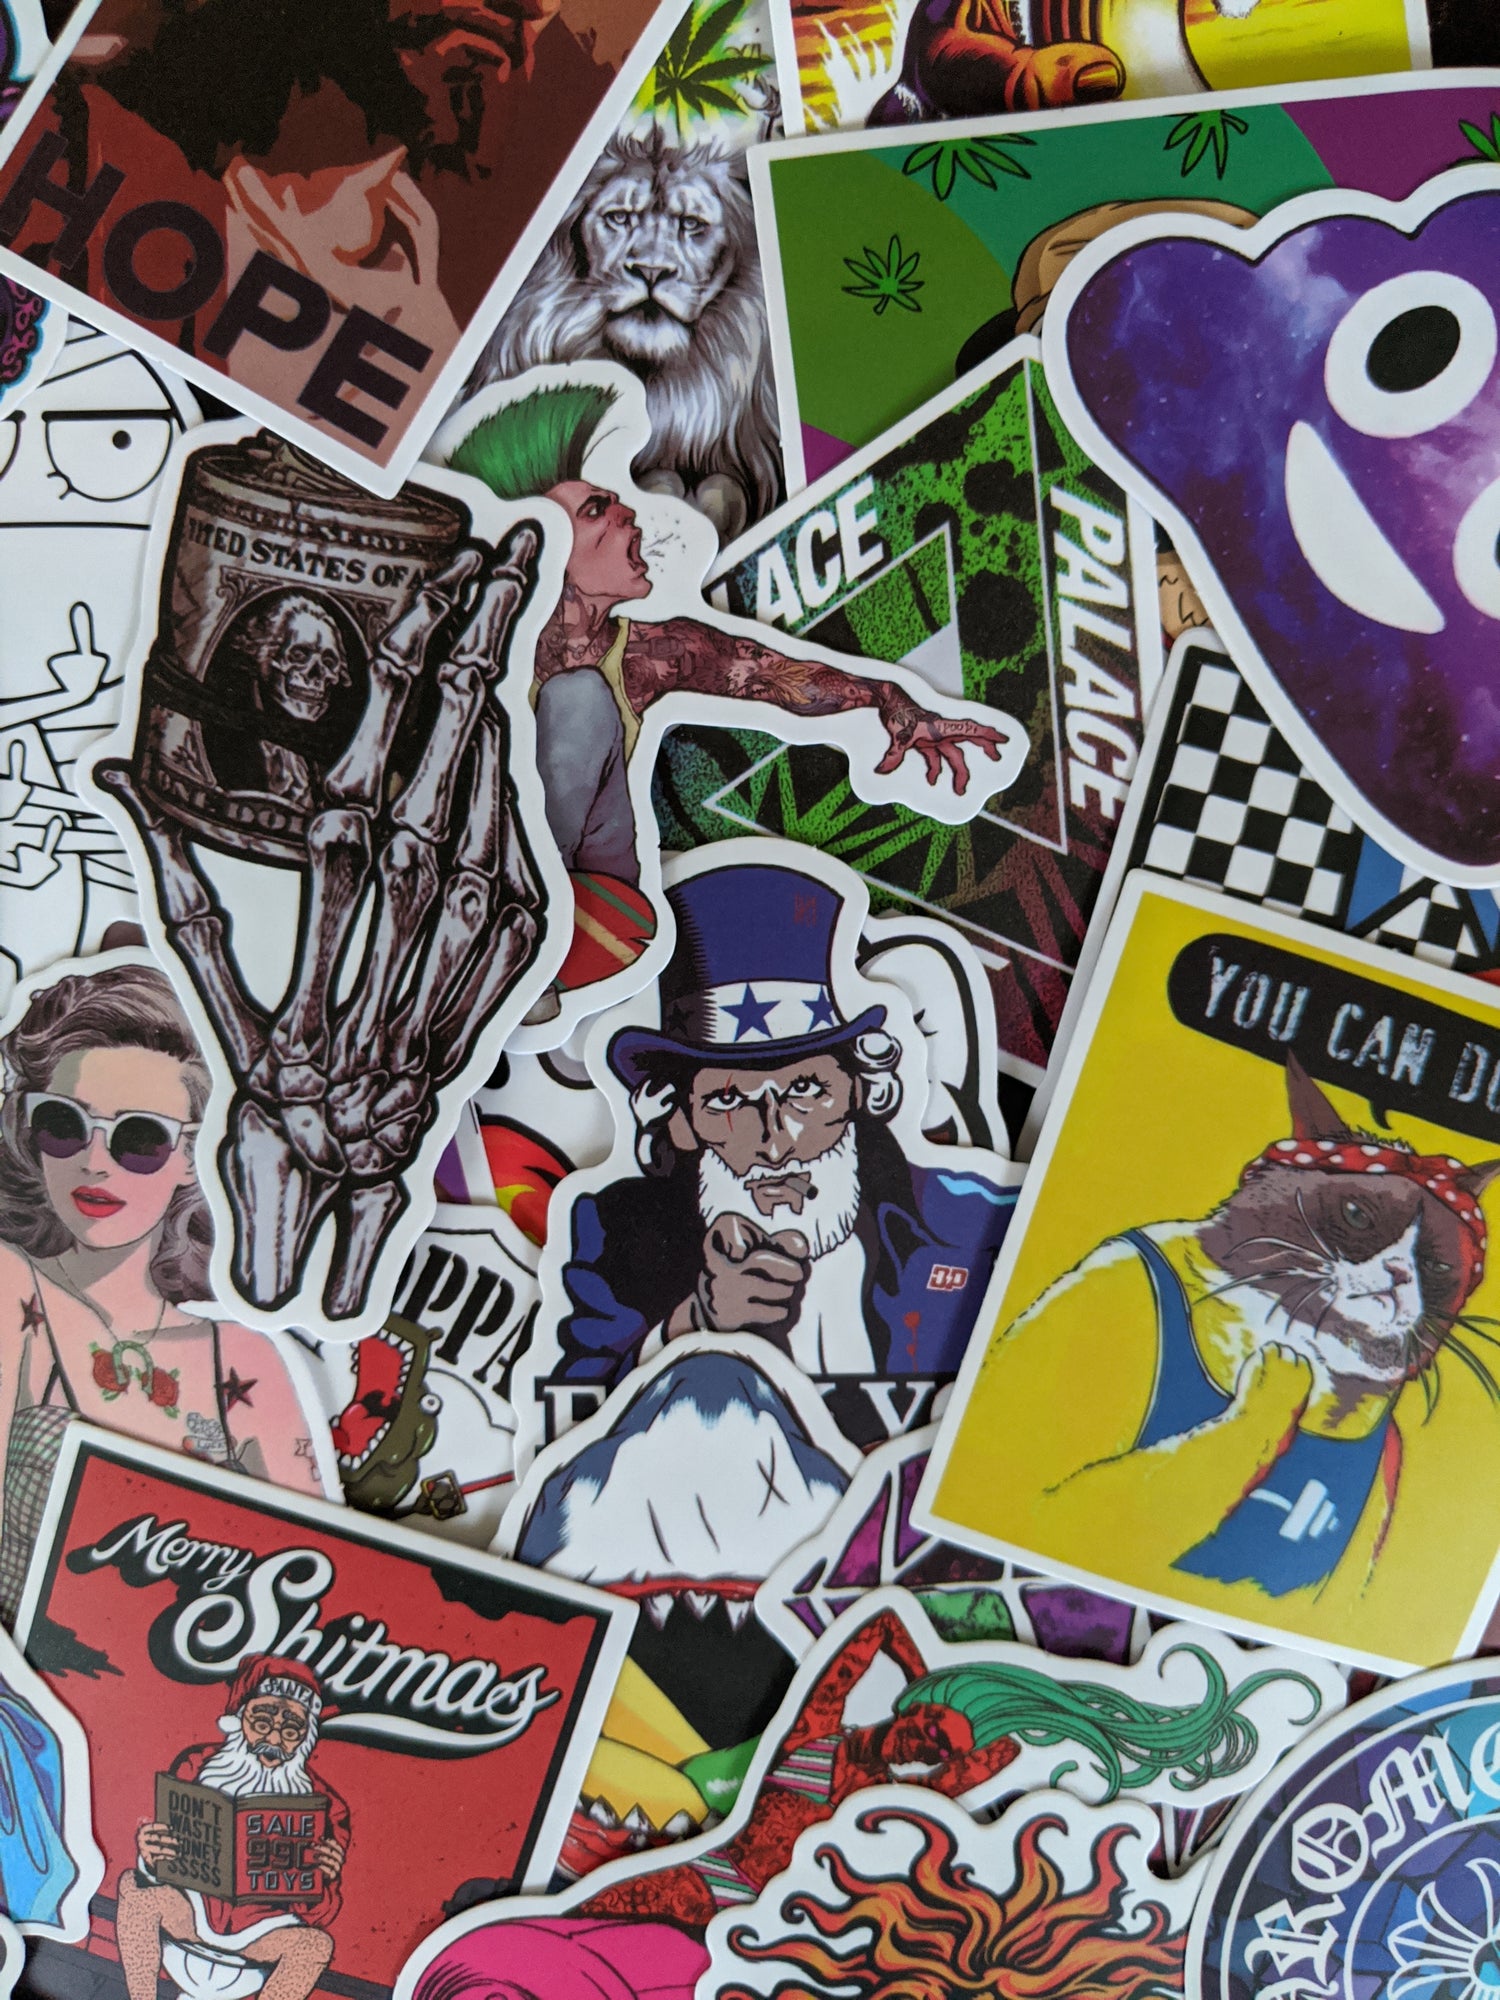 200 Skateboard Stickers bomb Vinyl Laptop Luggage Decals Dope Sticker Lot  cool